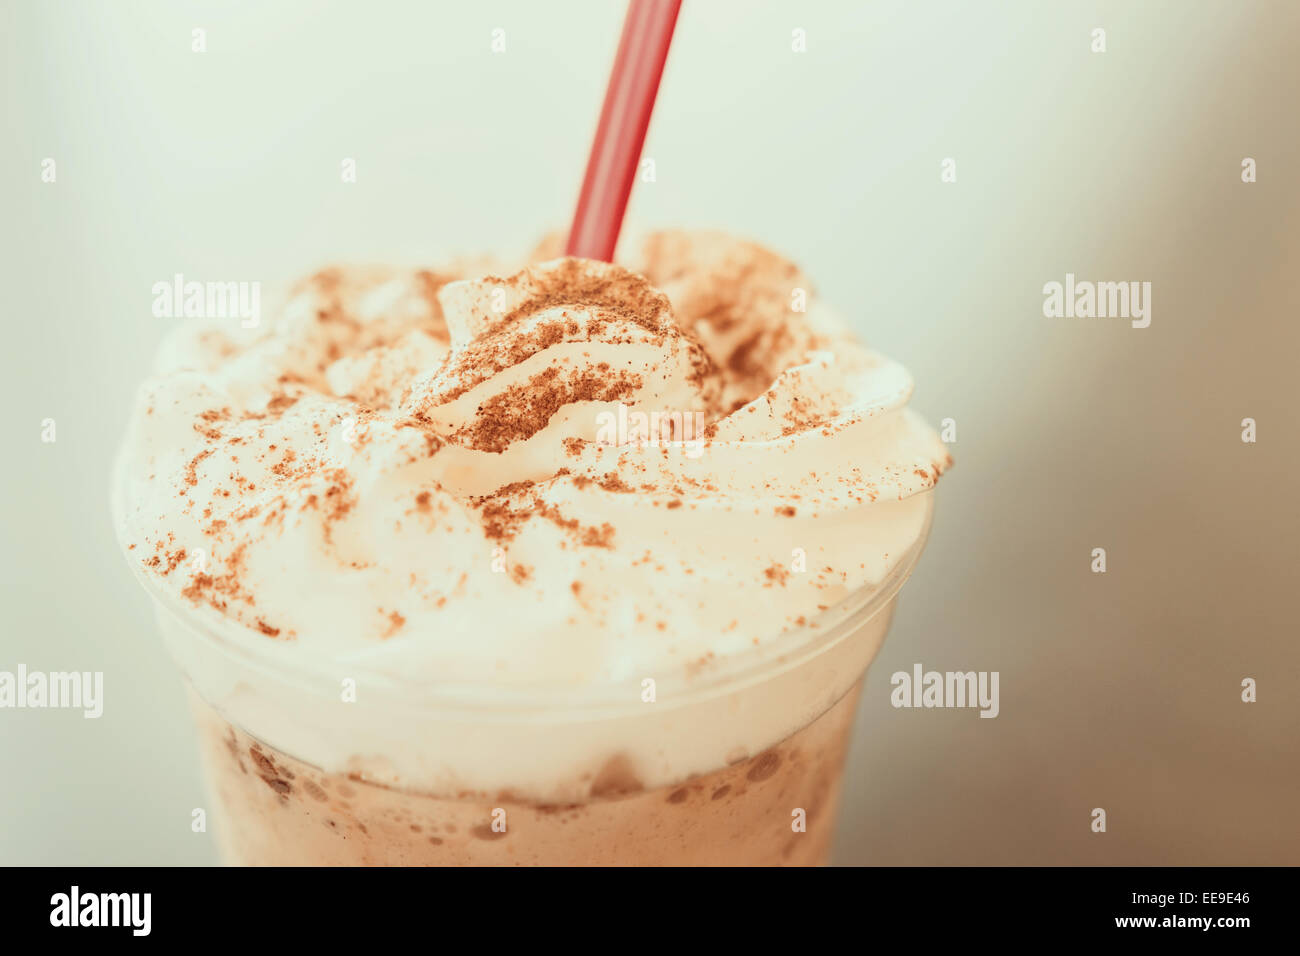 Retro Photo Of Frappe Iced Coffee Drink Stock Photo